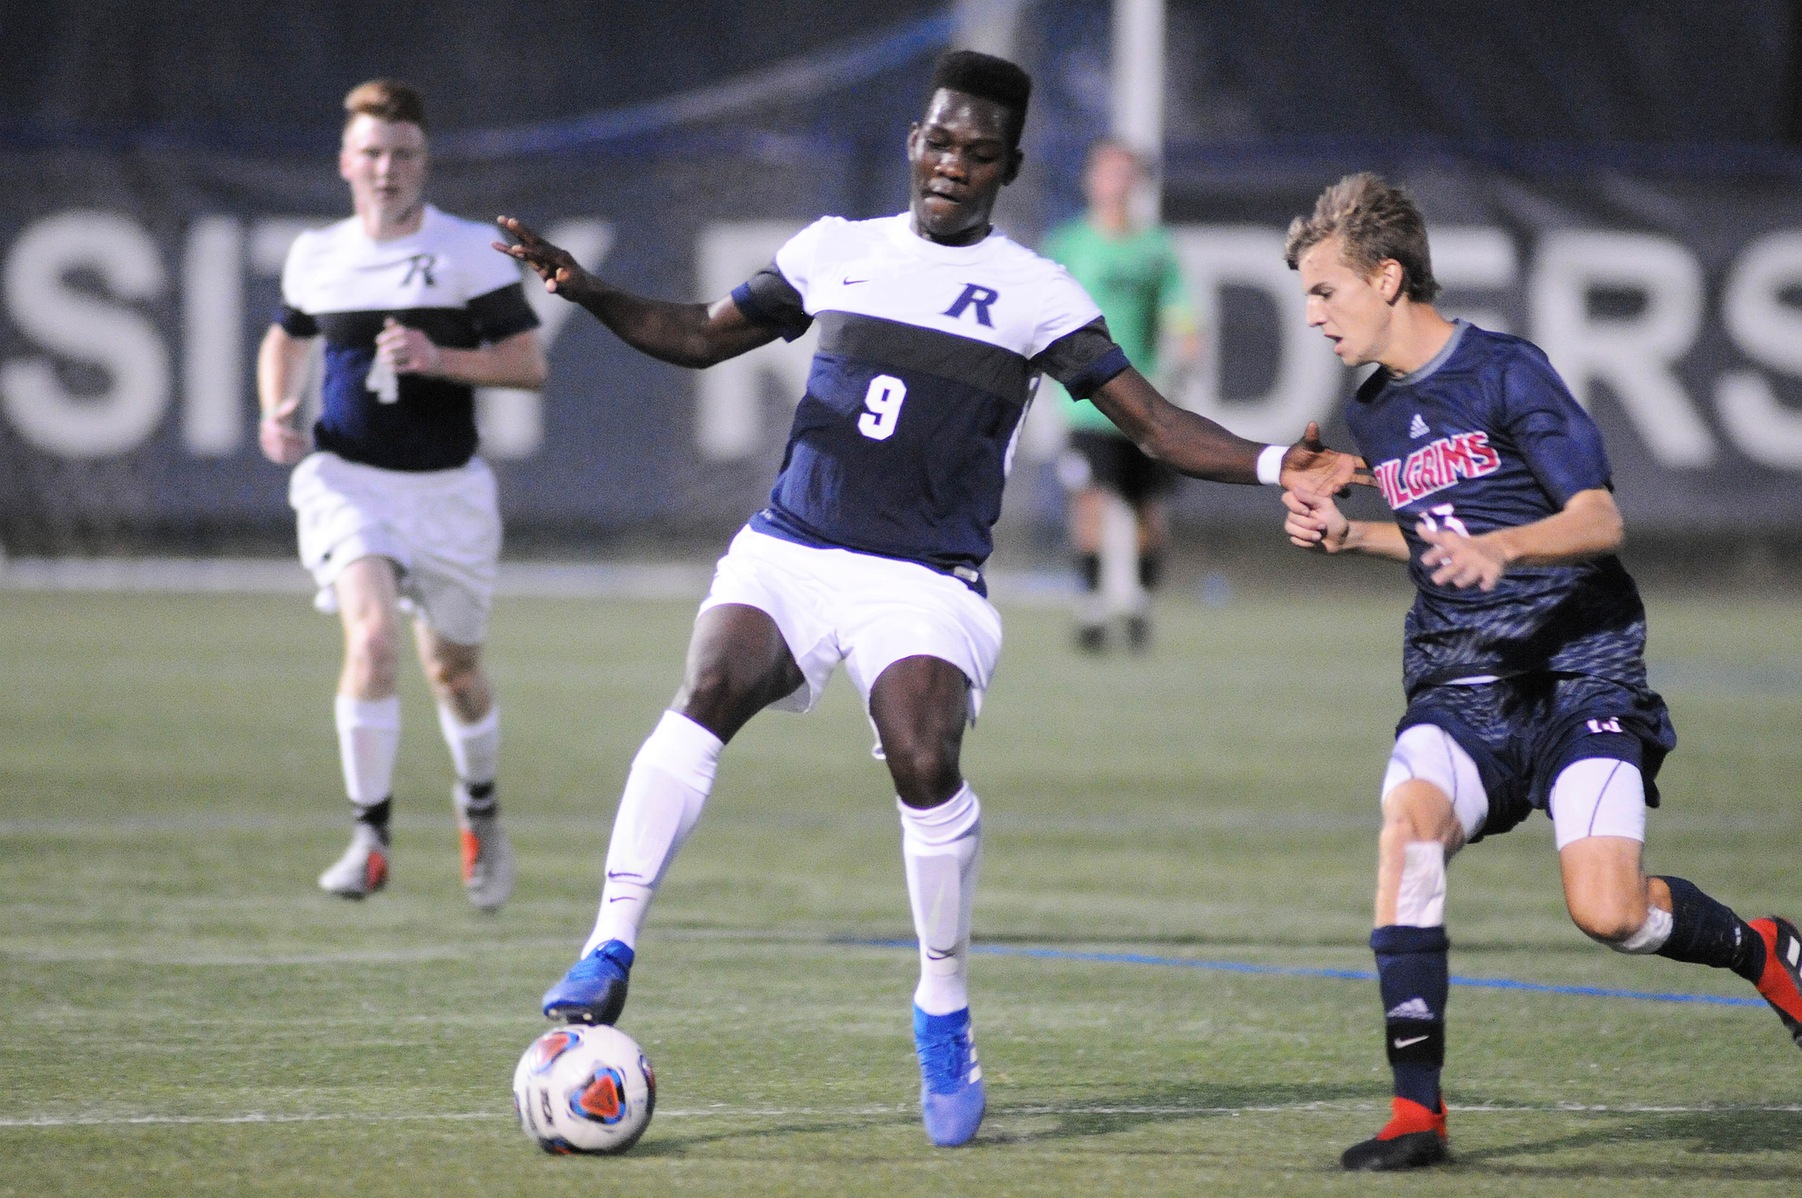 Men's Soccer: Francois nets first career goal in 1-1 draw with Becker